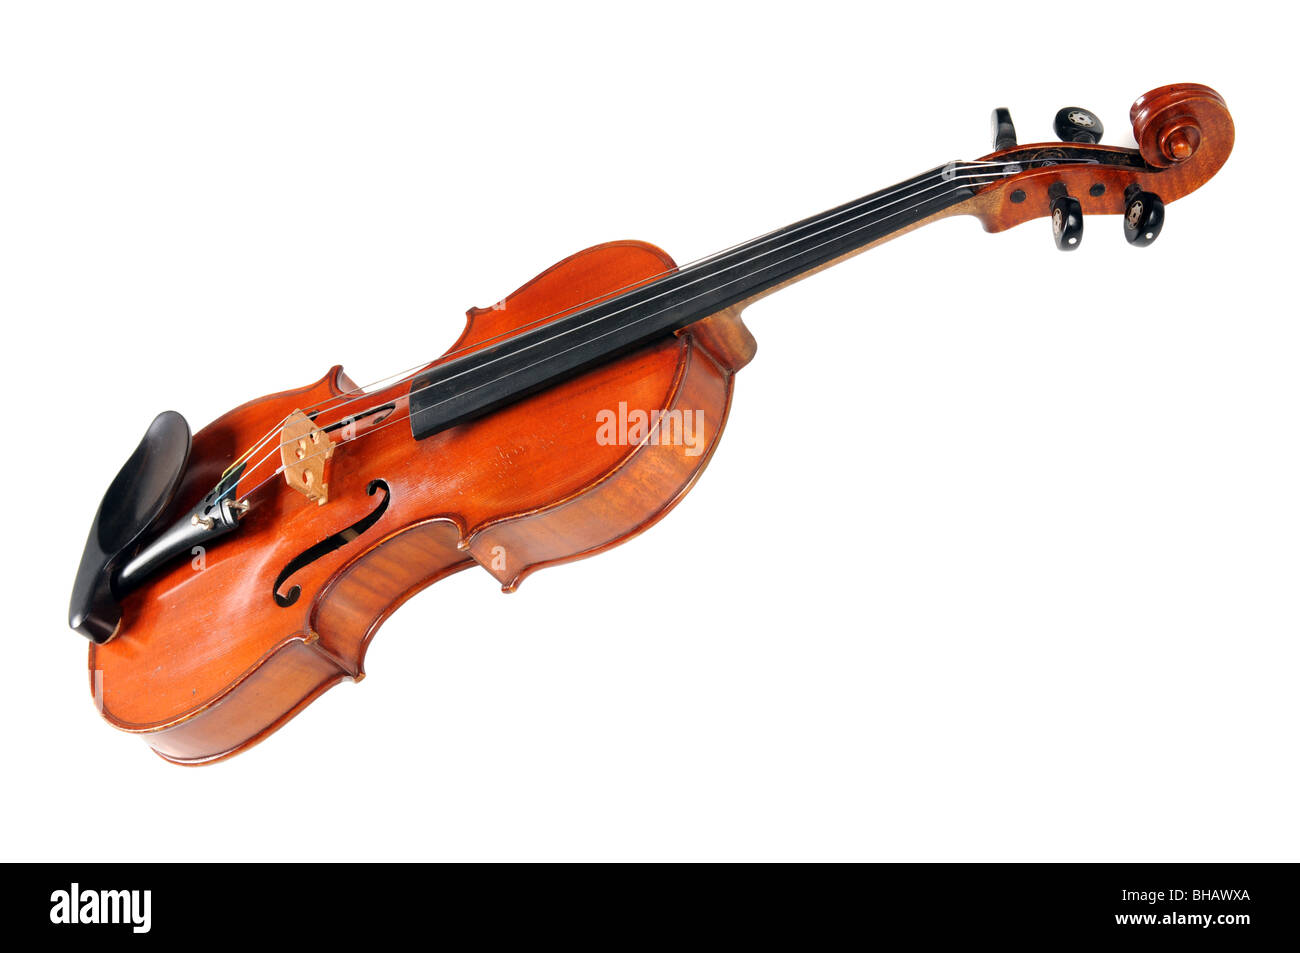 Vintage violin in frontal view isolated over white background Stock Photo